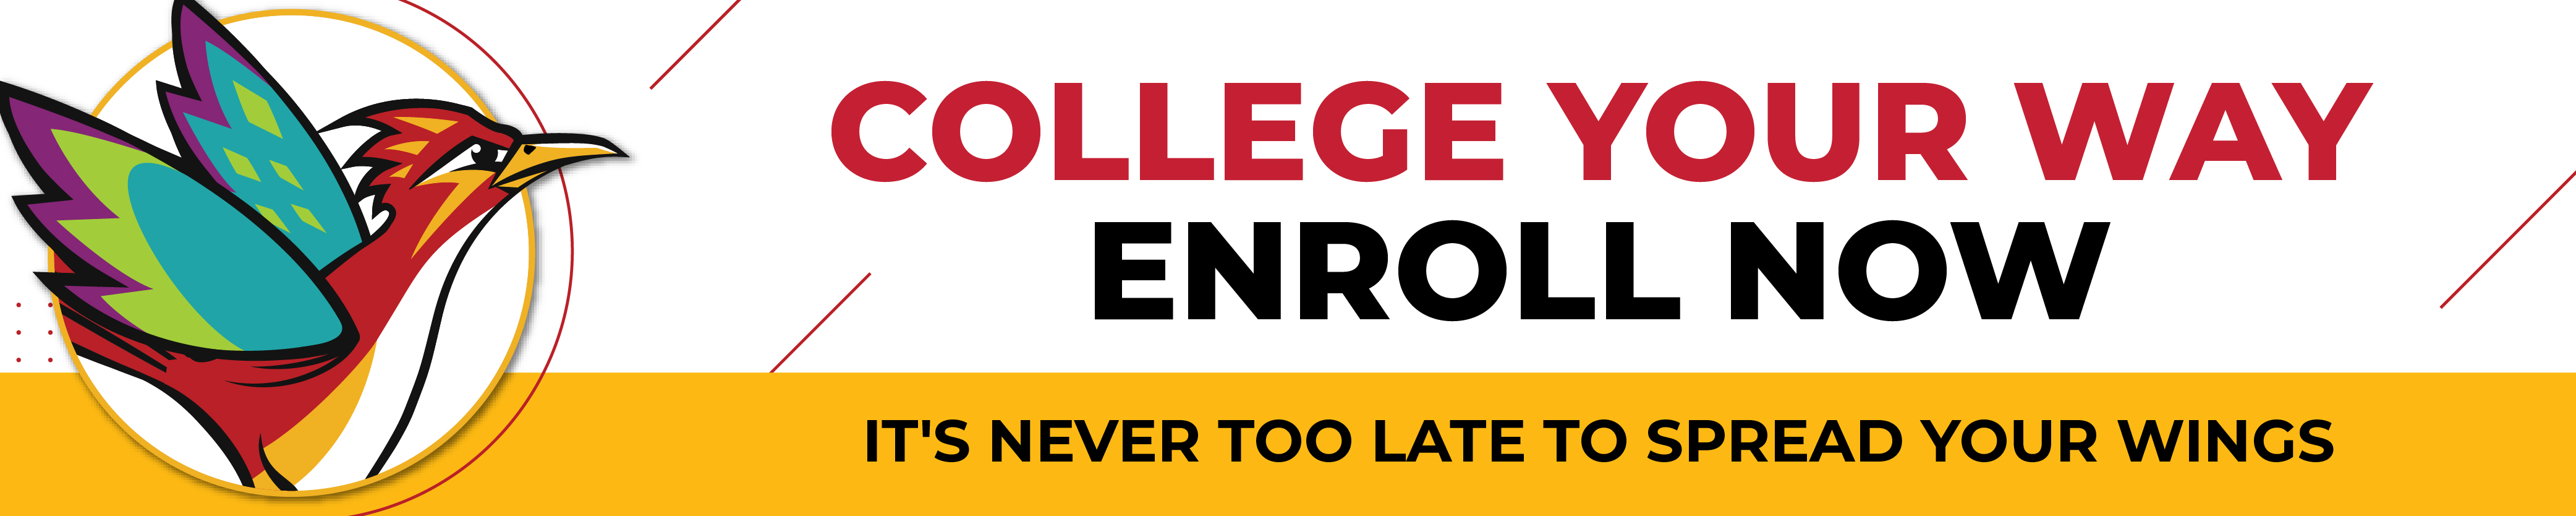 College your way, enroll now. It's never too late to spread your wings.